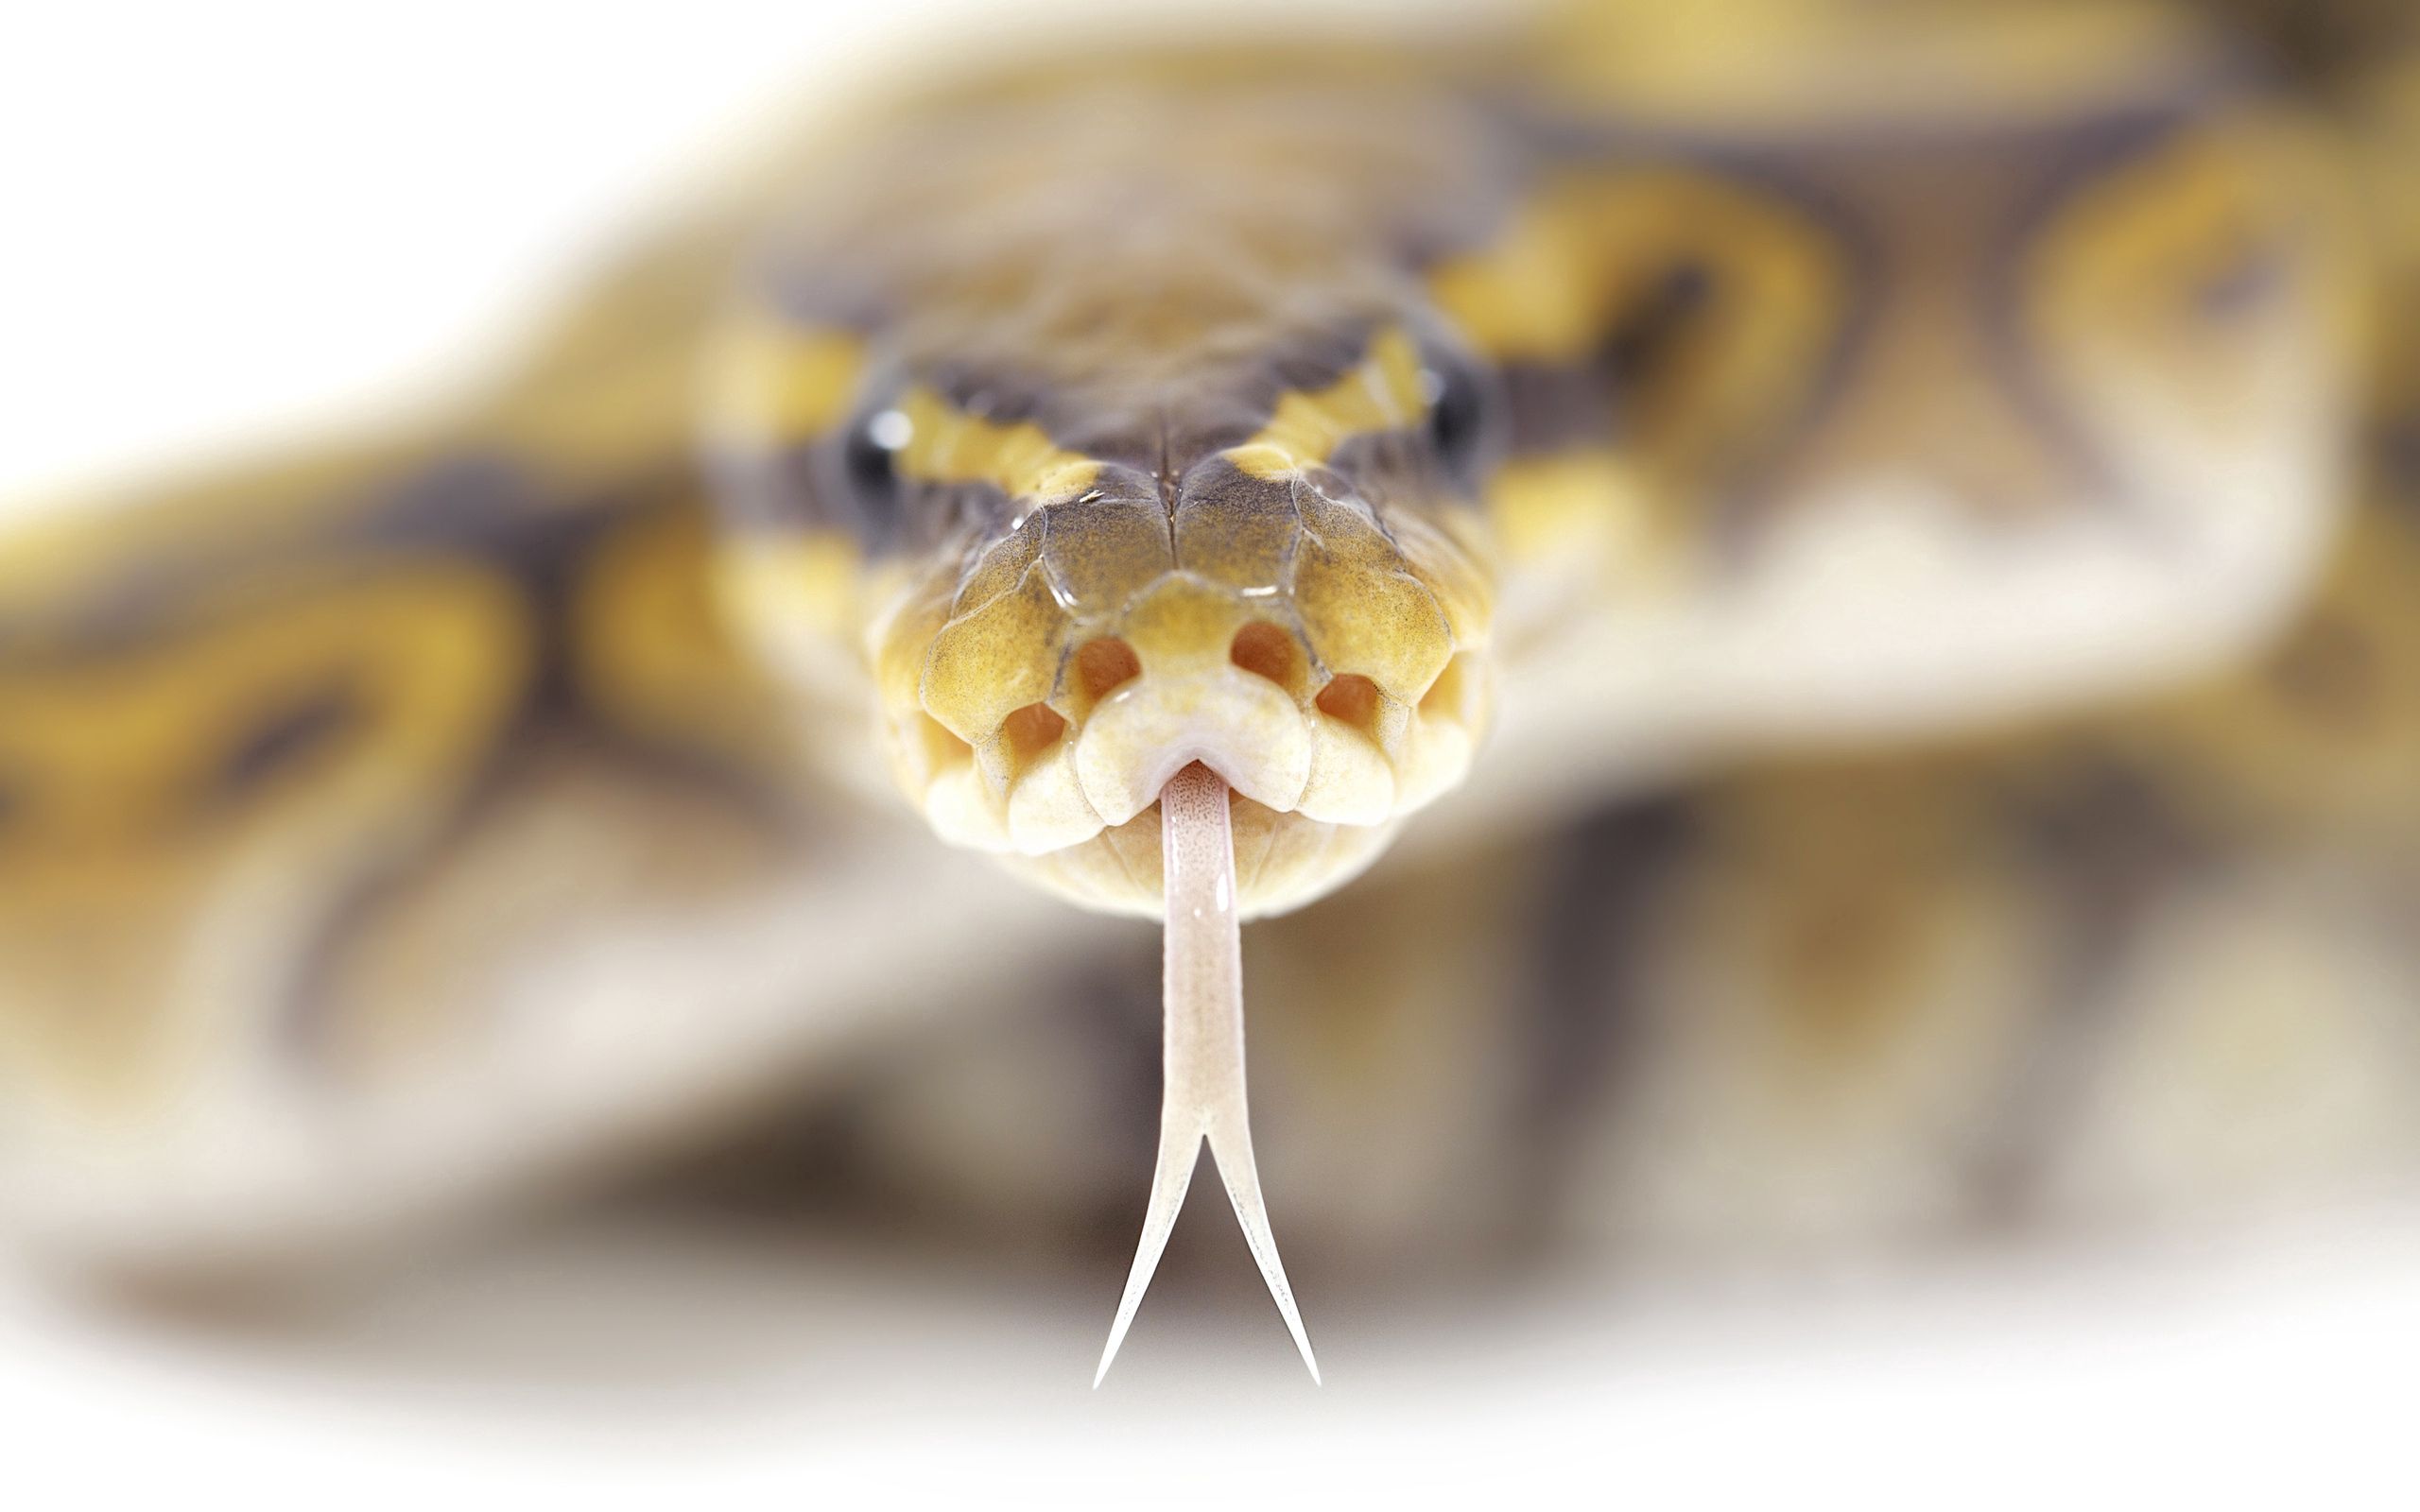 snake, animals, stains, spots, language, tongue, poison wallpaper for mobile